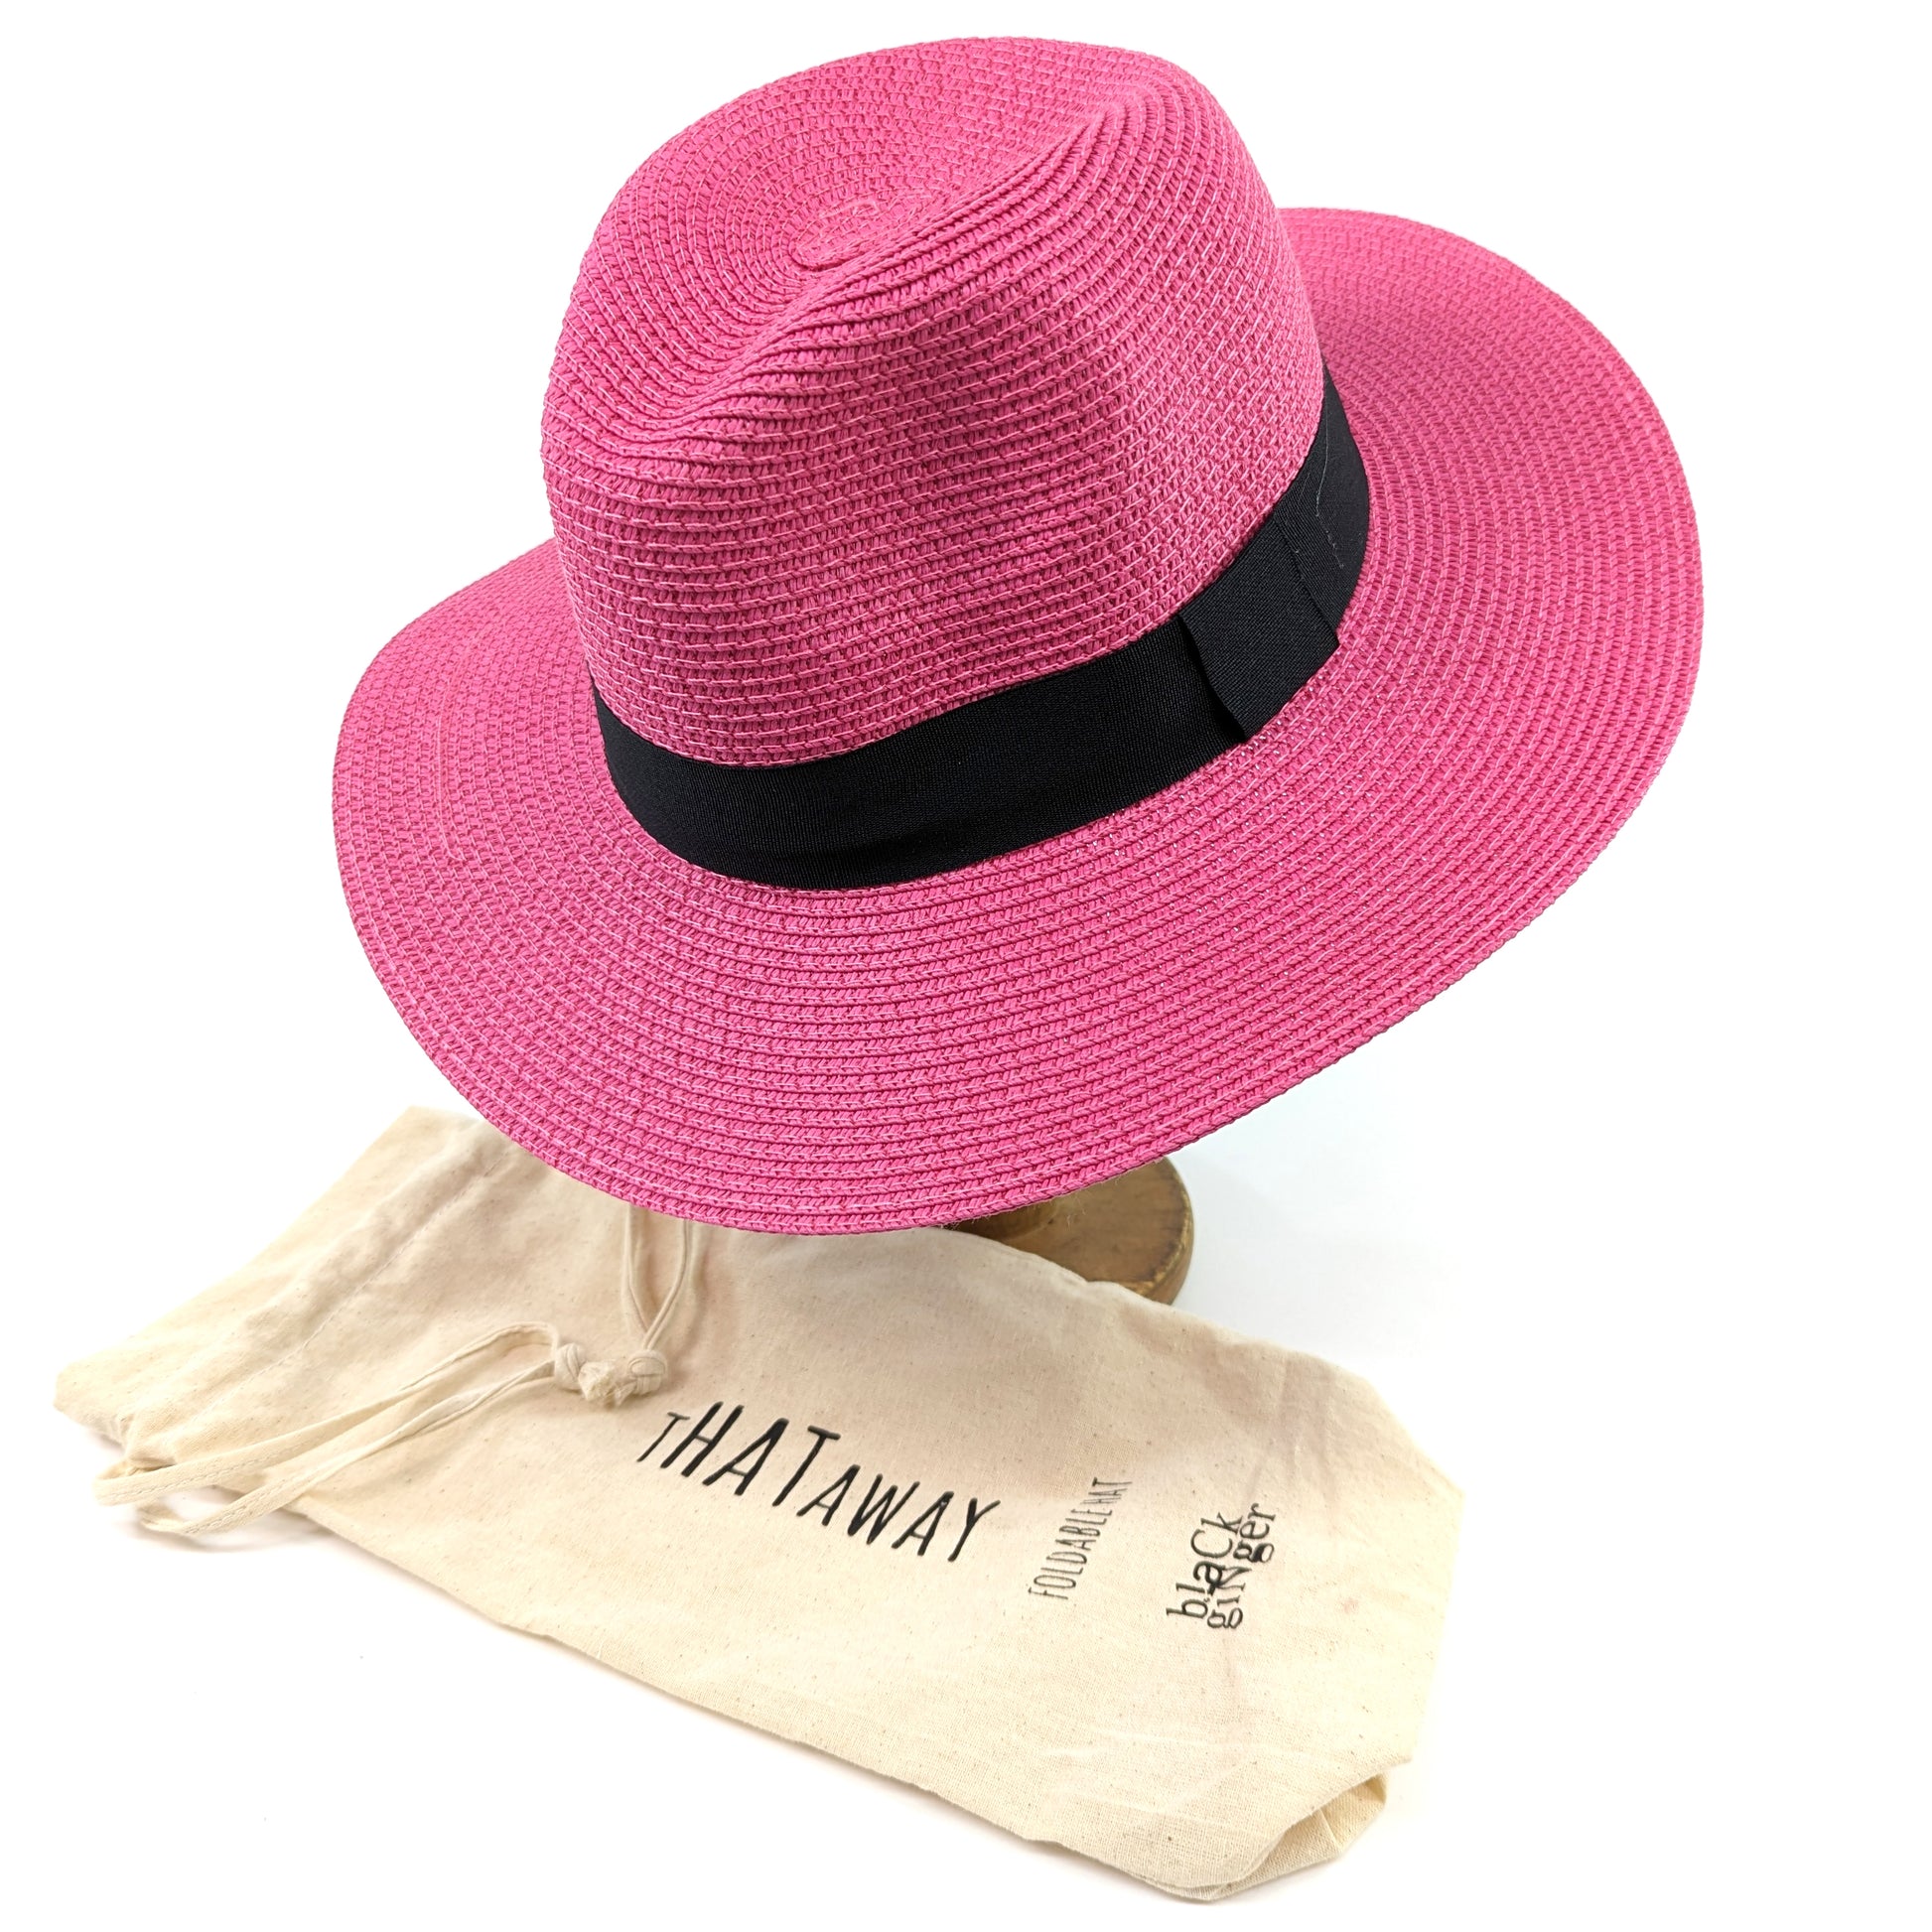 Image shows a bright pink panama hat with a black ribbon around the centre